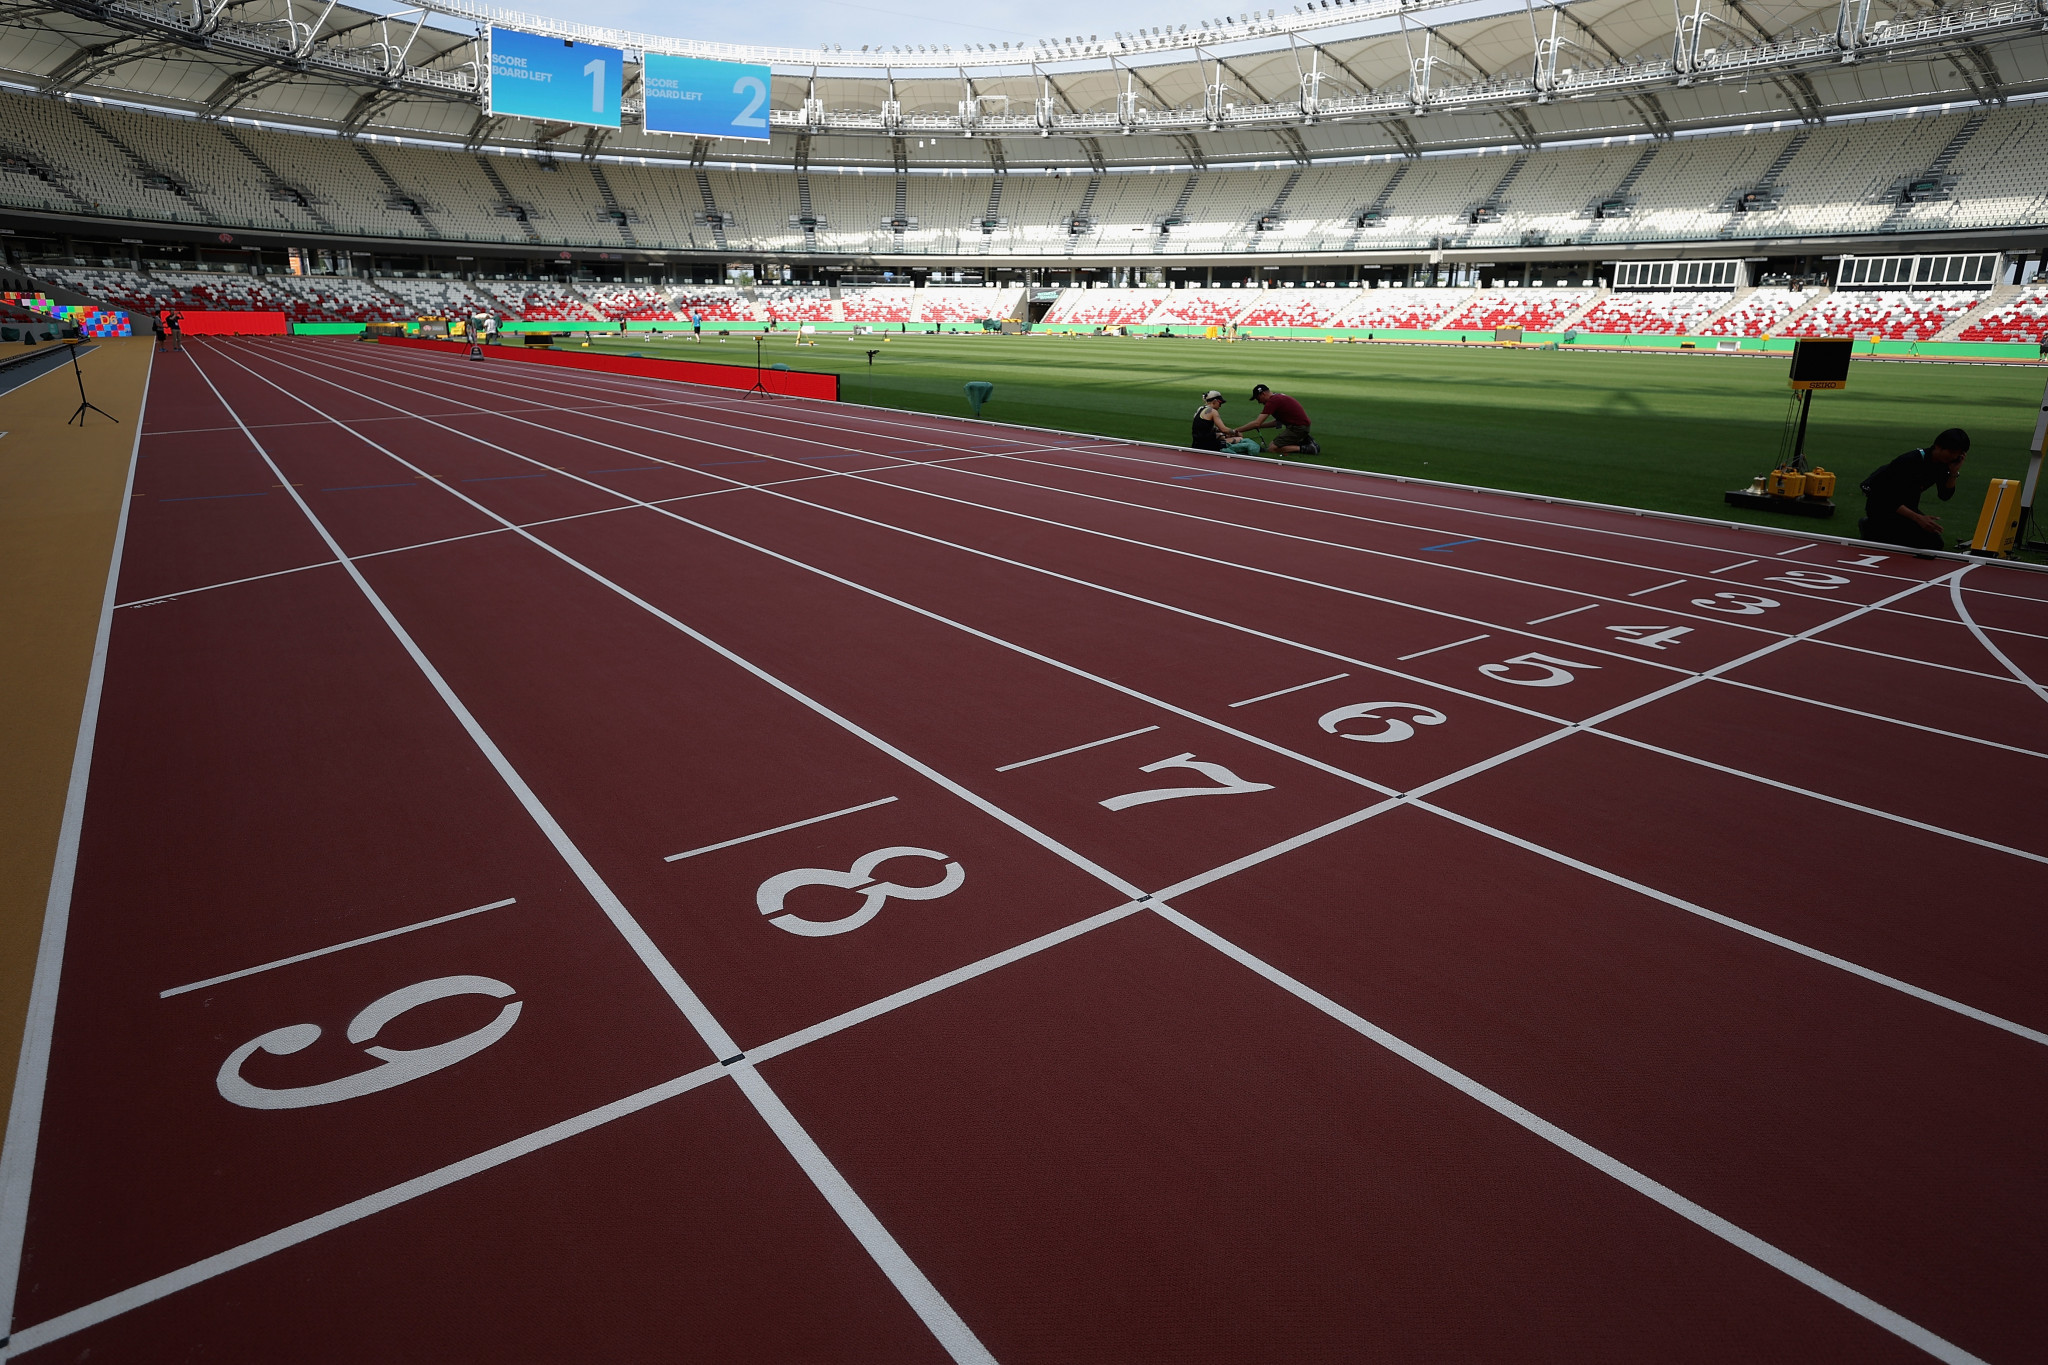 World Athletics introduces new athletes' representatives licensing system and safeguarding reforms